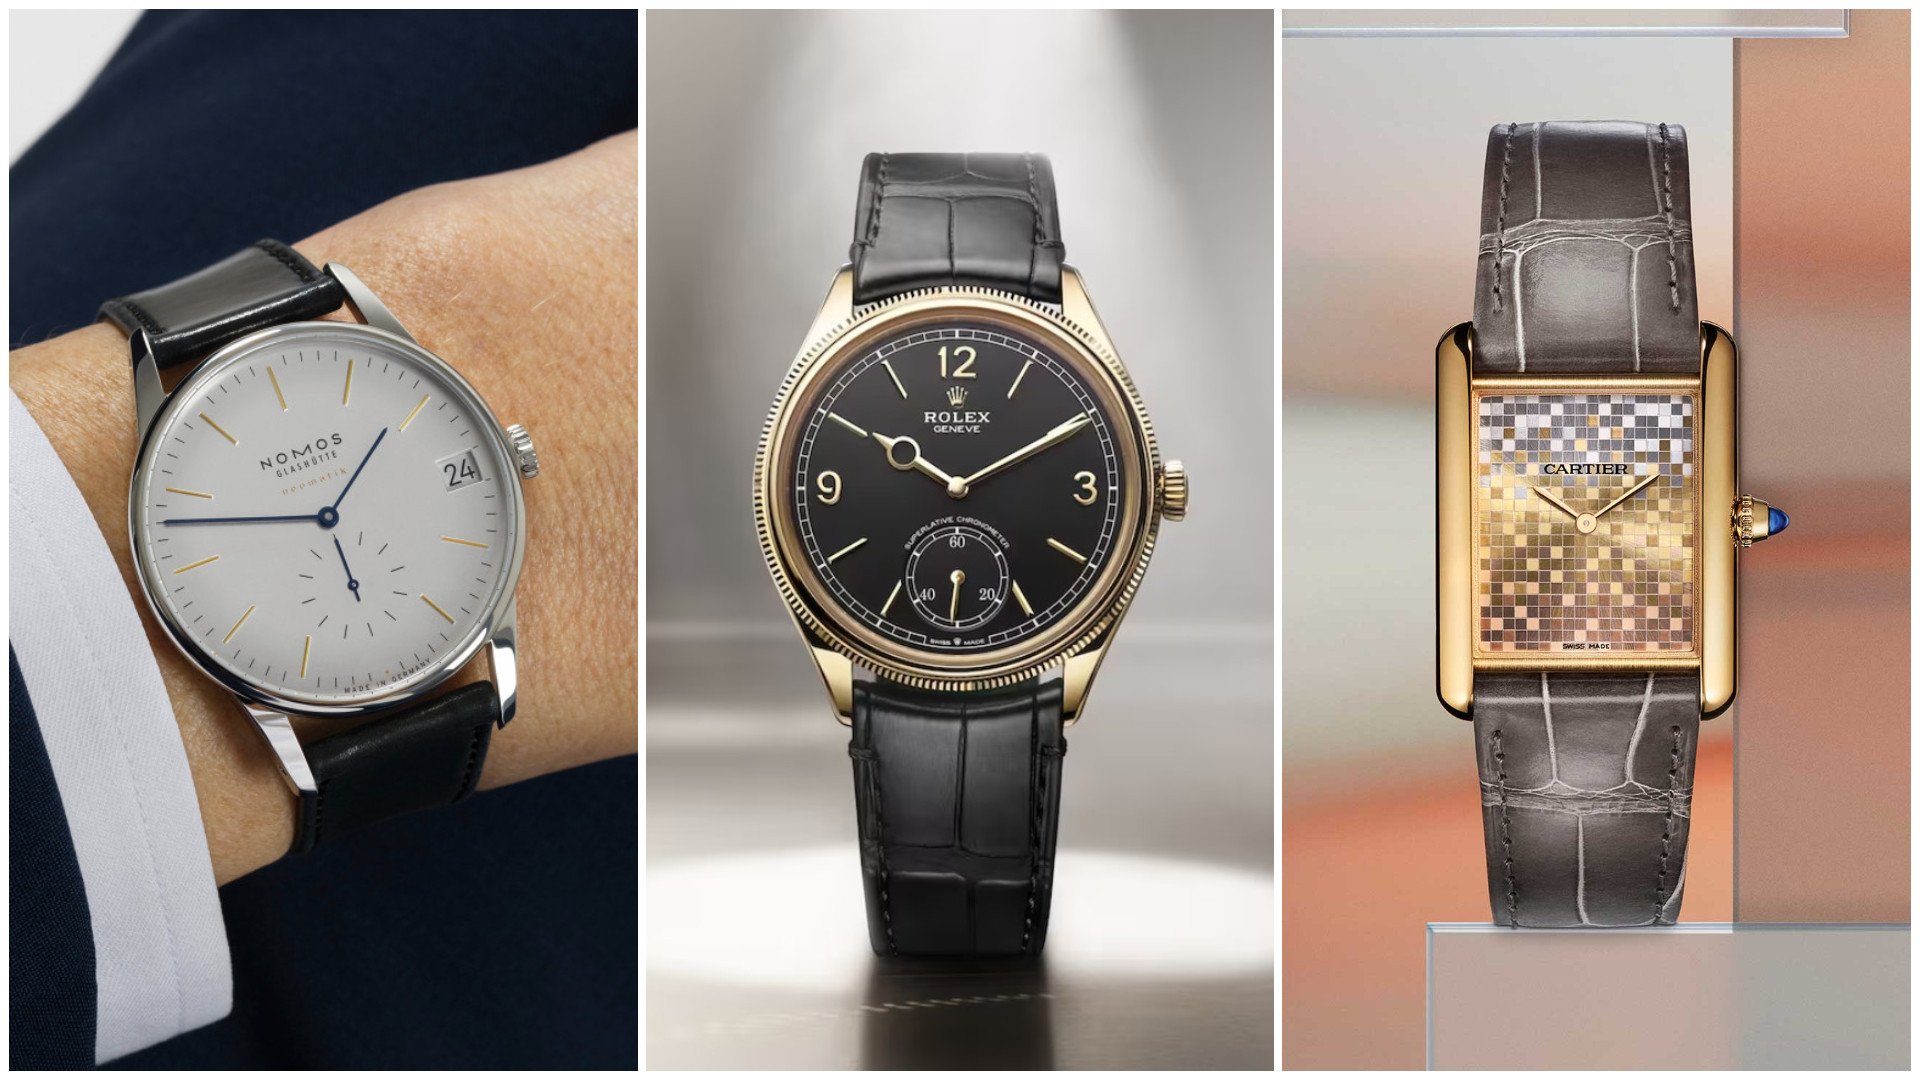 From left to right: Nomos Glashütte Orion Neomatik 175 Years Watchmaking; Rolex 1908; Cartier Tank Louis Cartier 2023